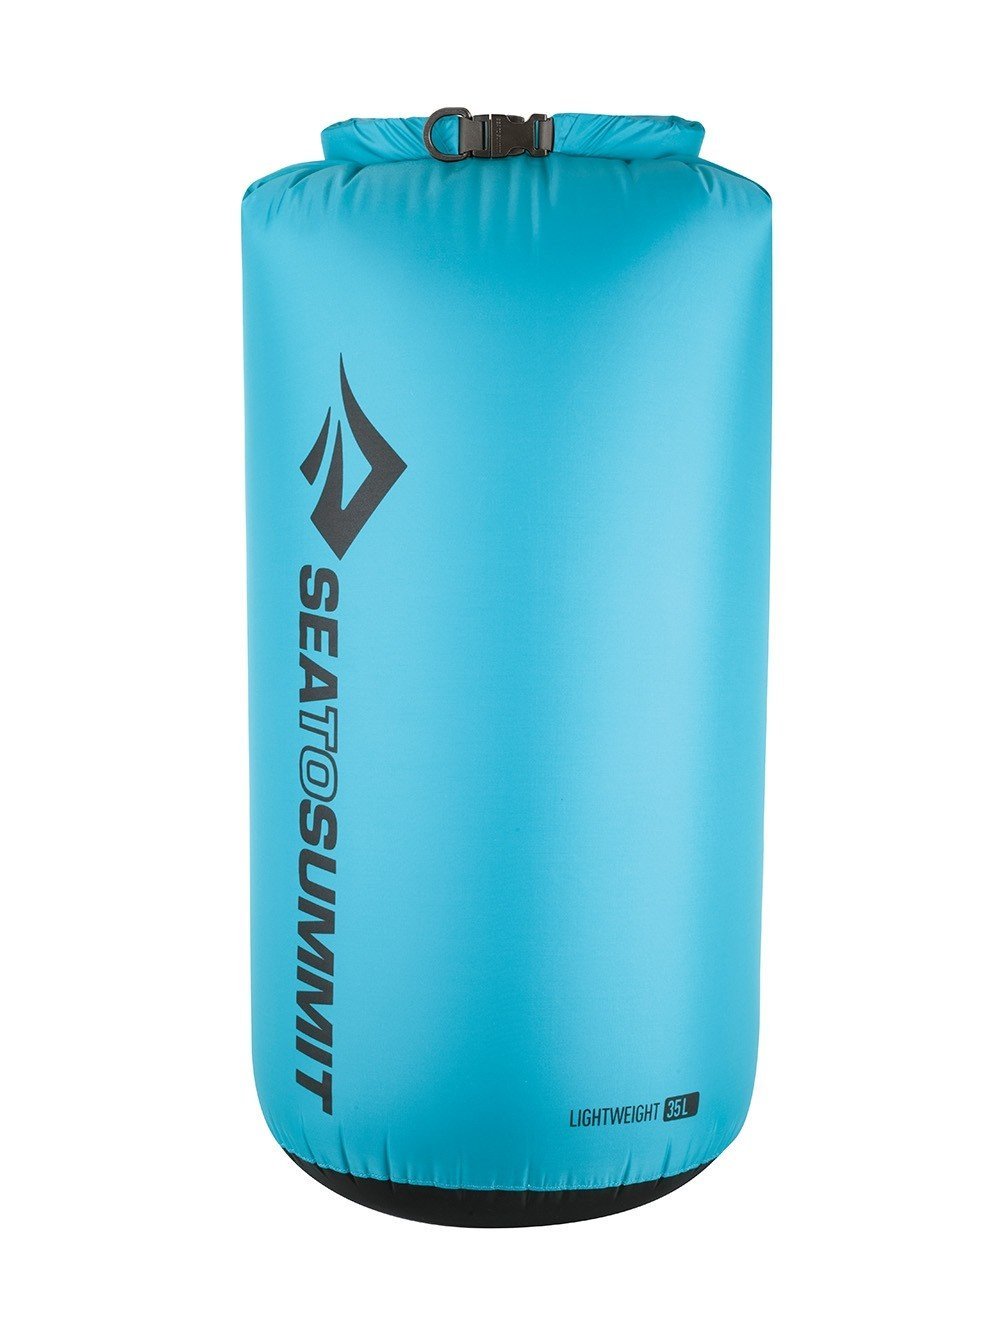 Sea To Summit Lightweight 70D 35 Litres Dry Sack Bags, Packs and Cases Sea To Summit Blue Tactical Gear Supplier Tactical Distributors Australia